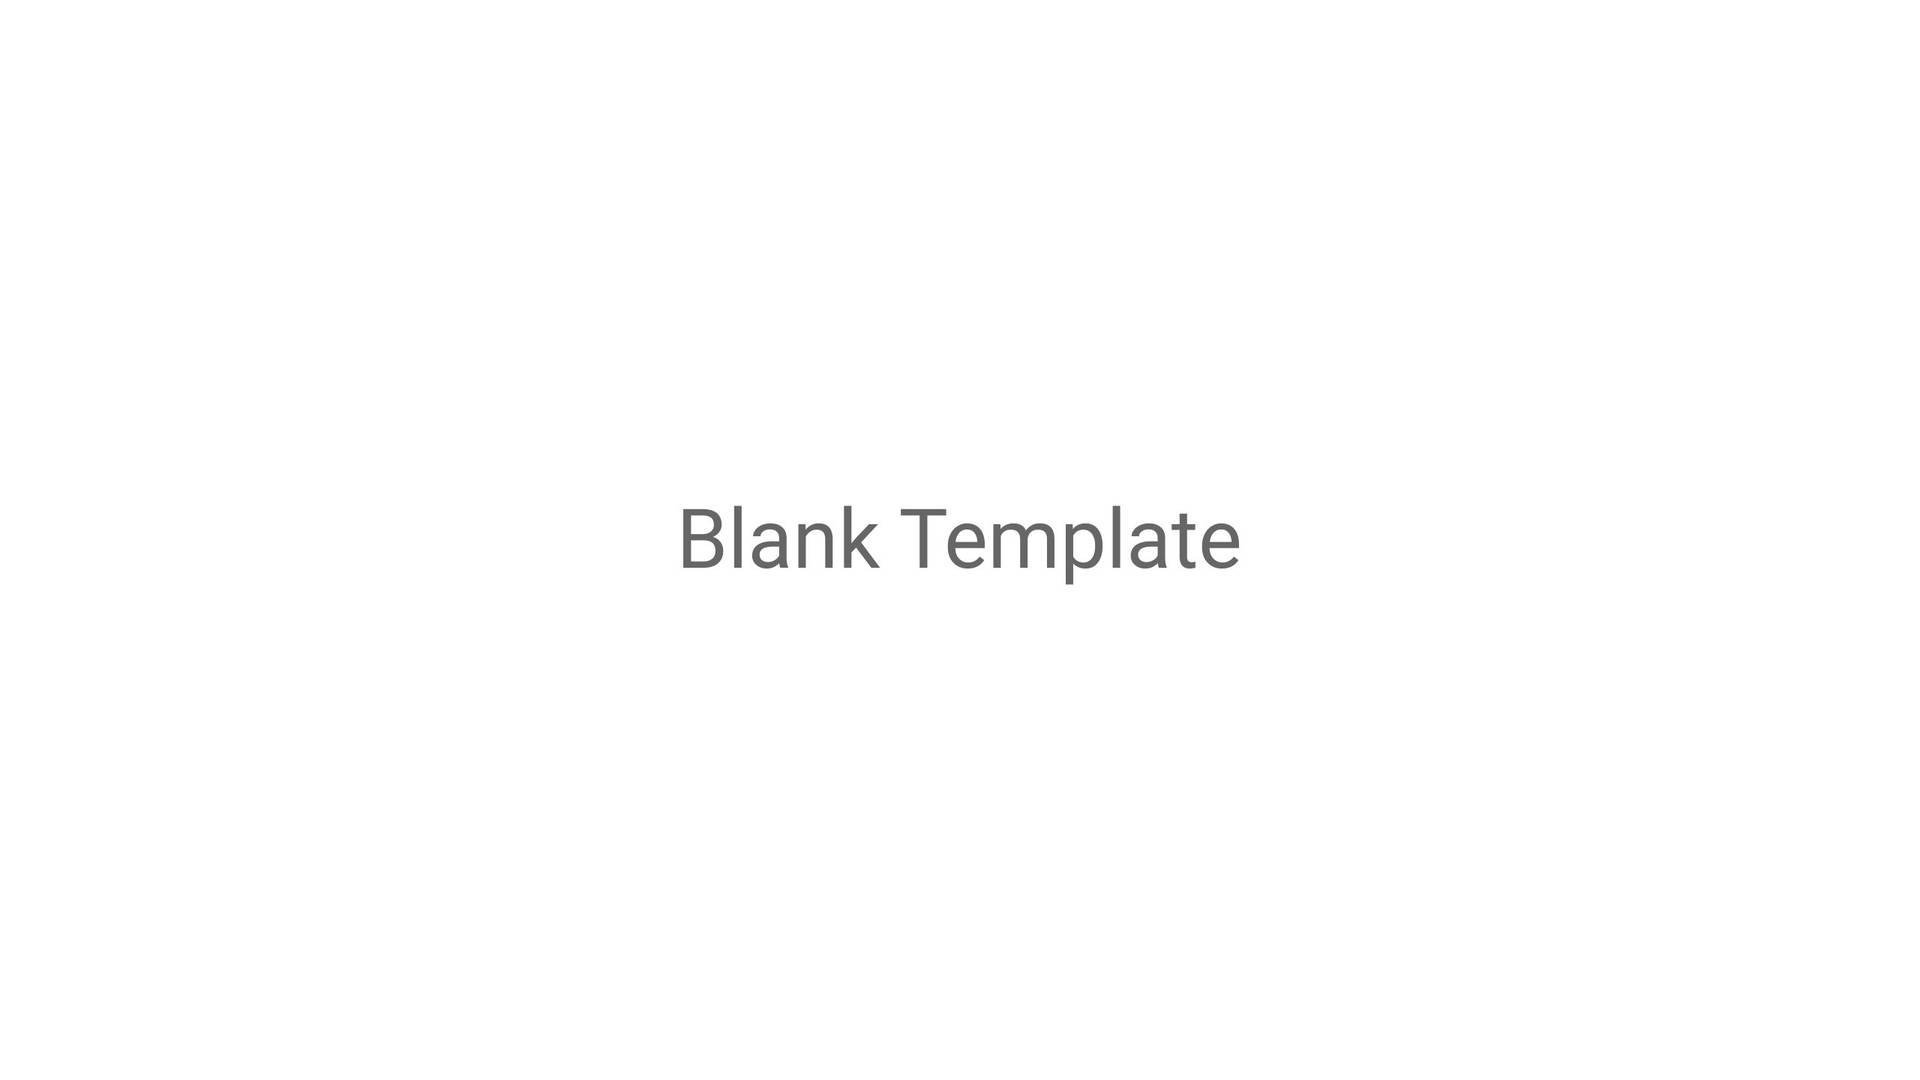 Blank White Blank Template Background